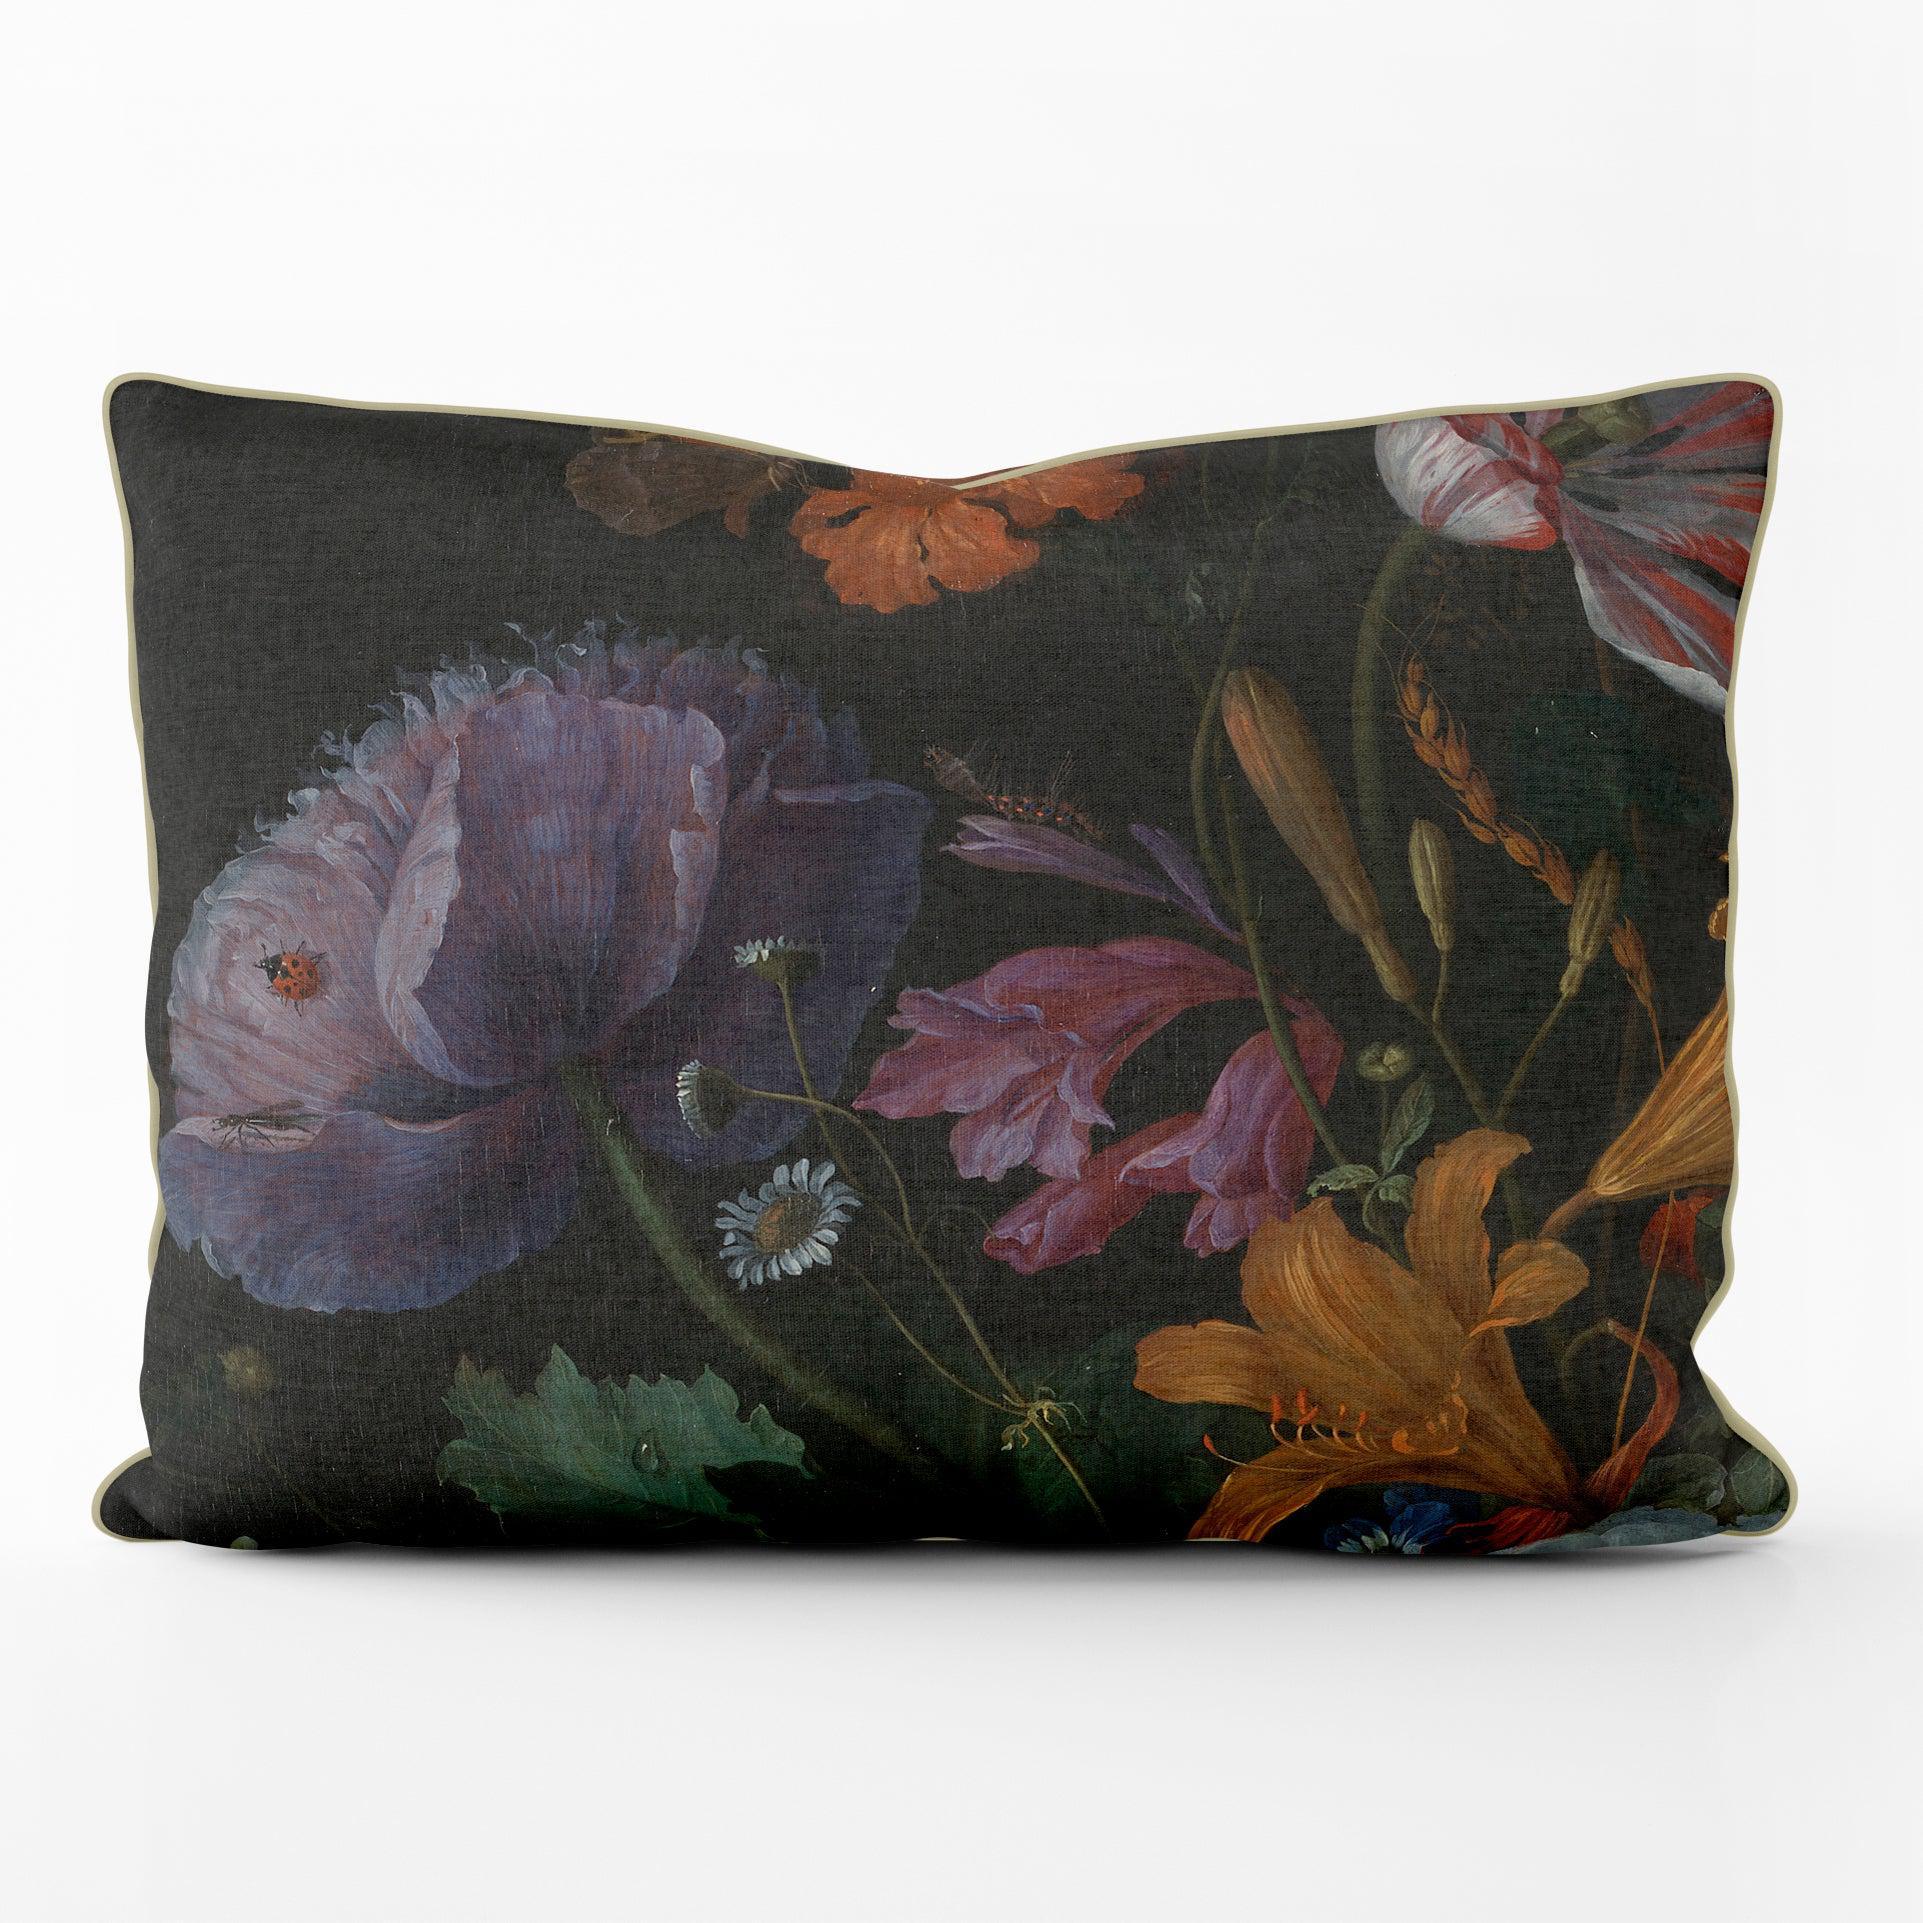 Flowers in a Glass Vase Detail Ladybird - Van Wallscapelle - National Gallery LUXE Cushion - Handmade Cushions UK - WeLoveCushions